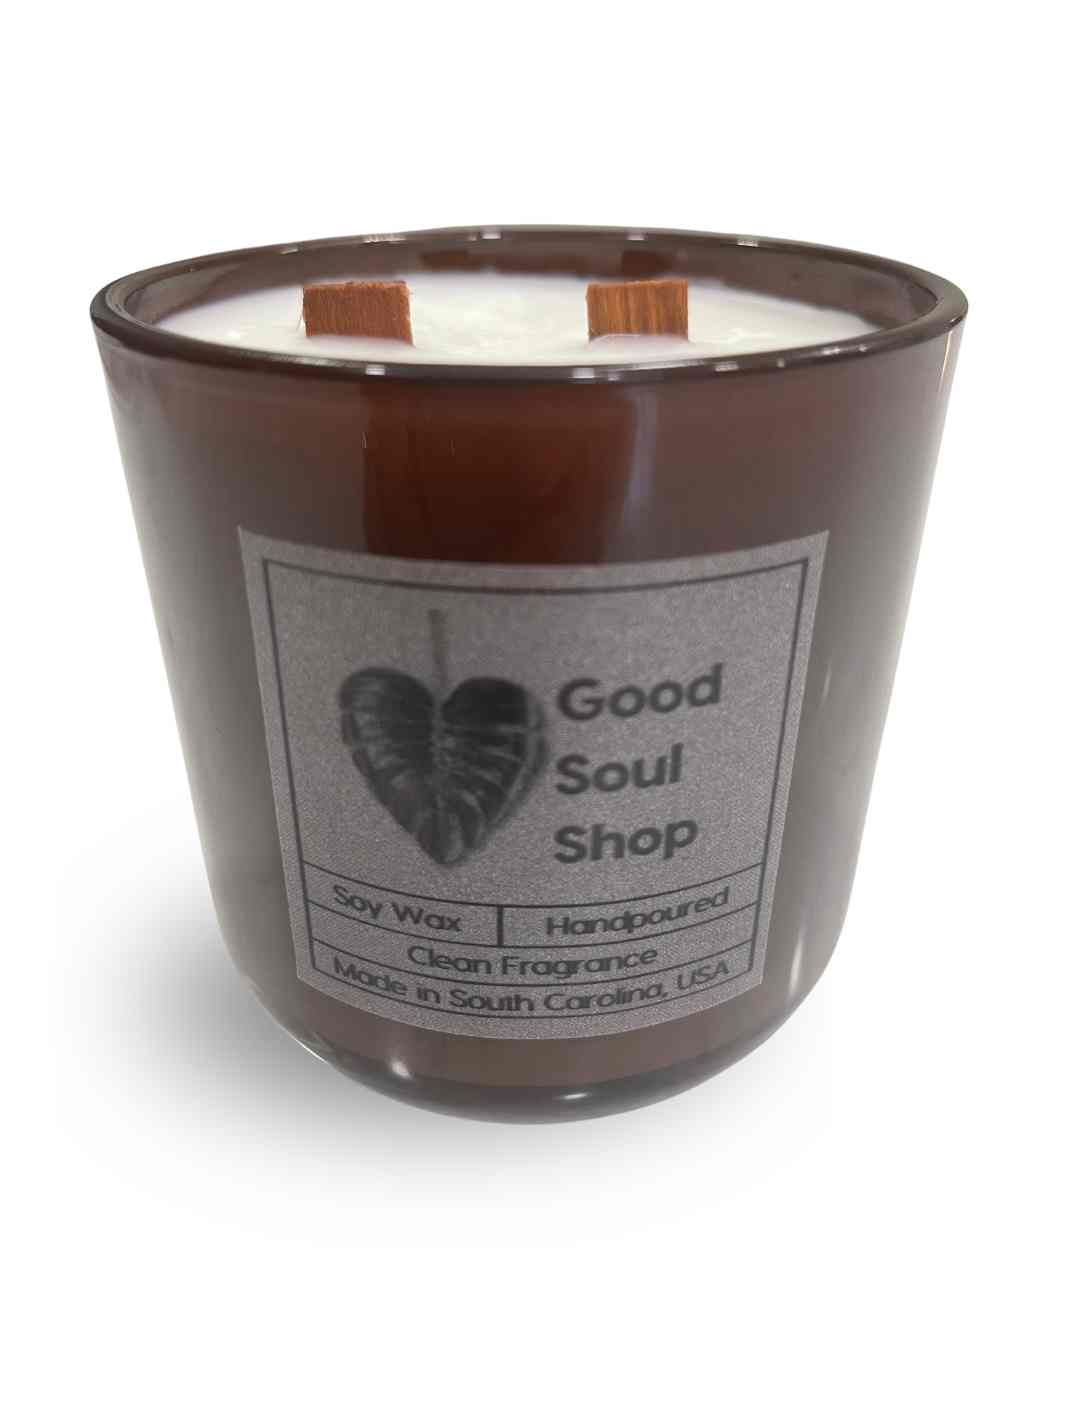 Good Soul Shop Handpoured Soy Clean Fragrance Double Wood Wick Candle